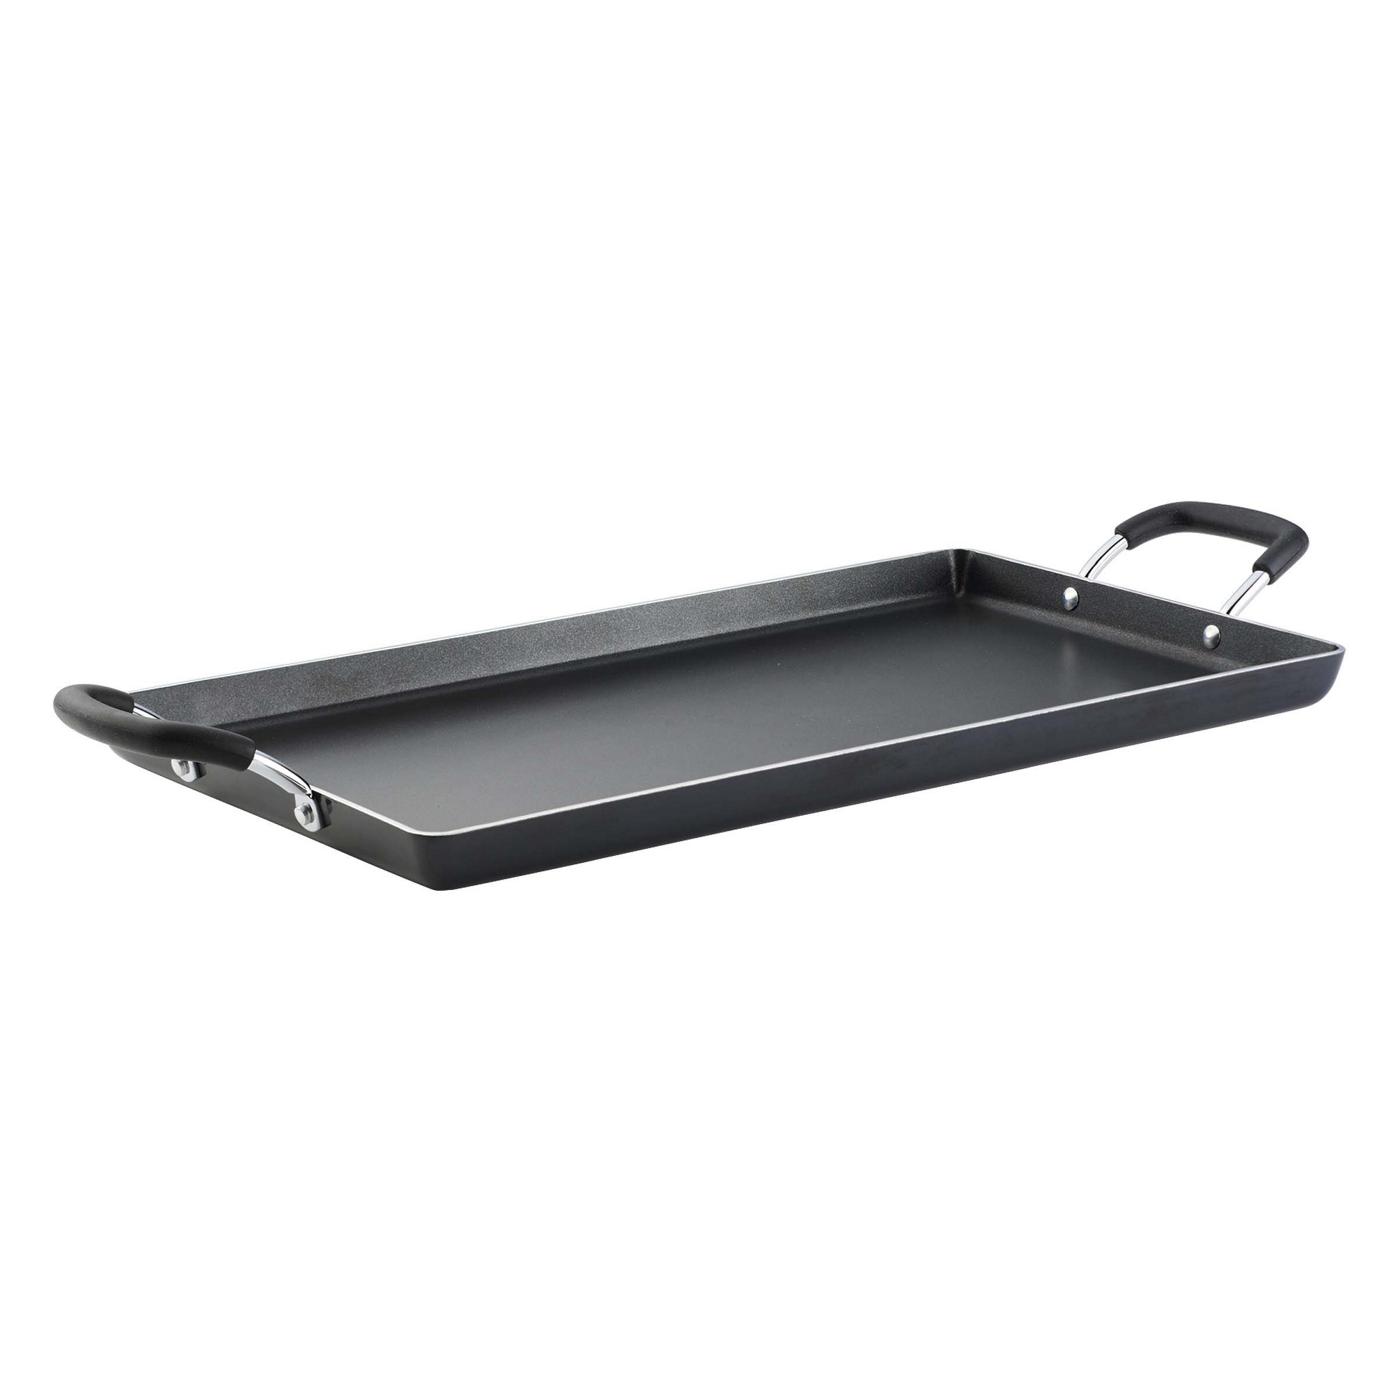 10-Inch x 18-Inch Double Burner Griddle with Mini Turner